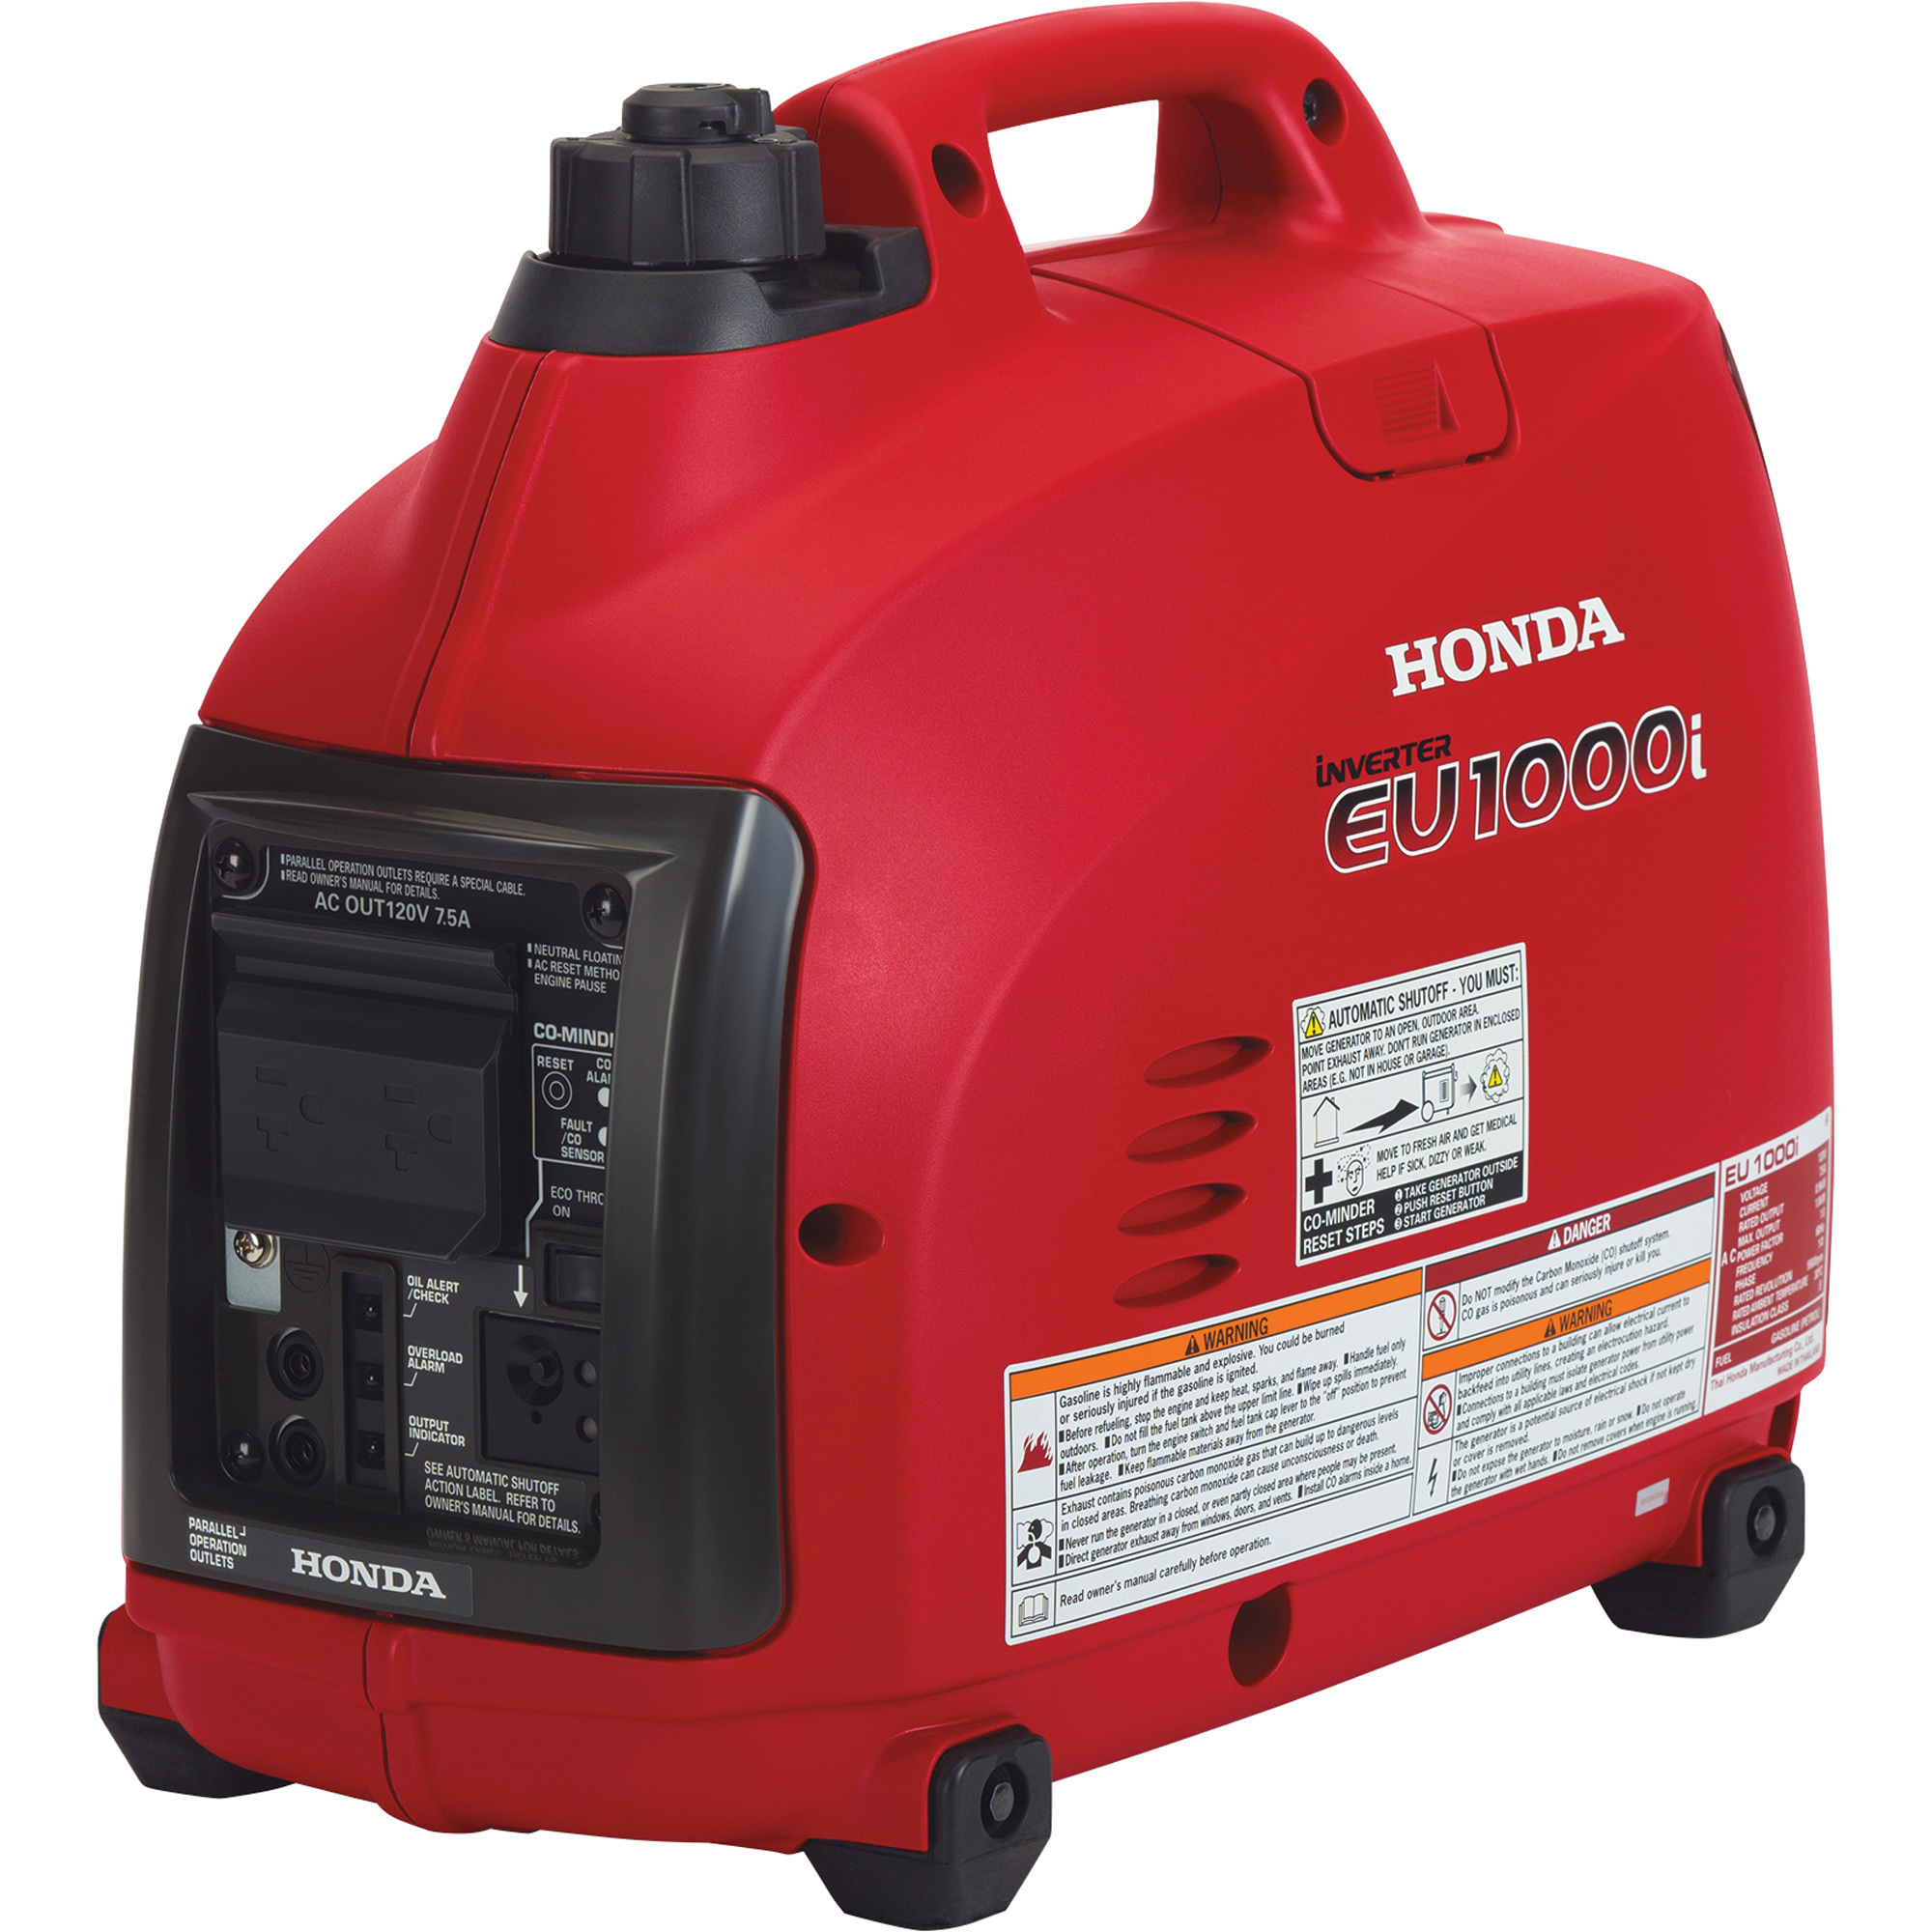 Honda EU1000i Generator, 1000W/900W, CARB with CO Minder for Safety, EU1000T1AG | Northern Tool